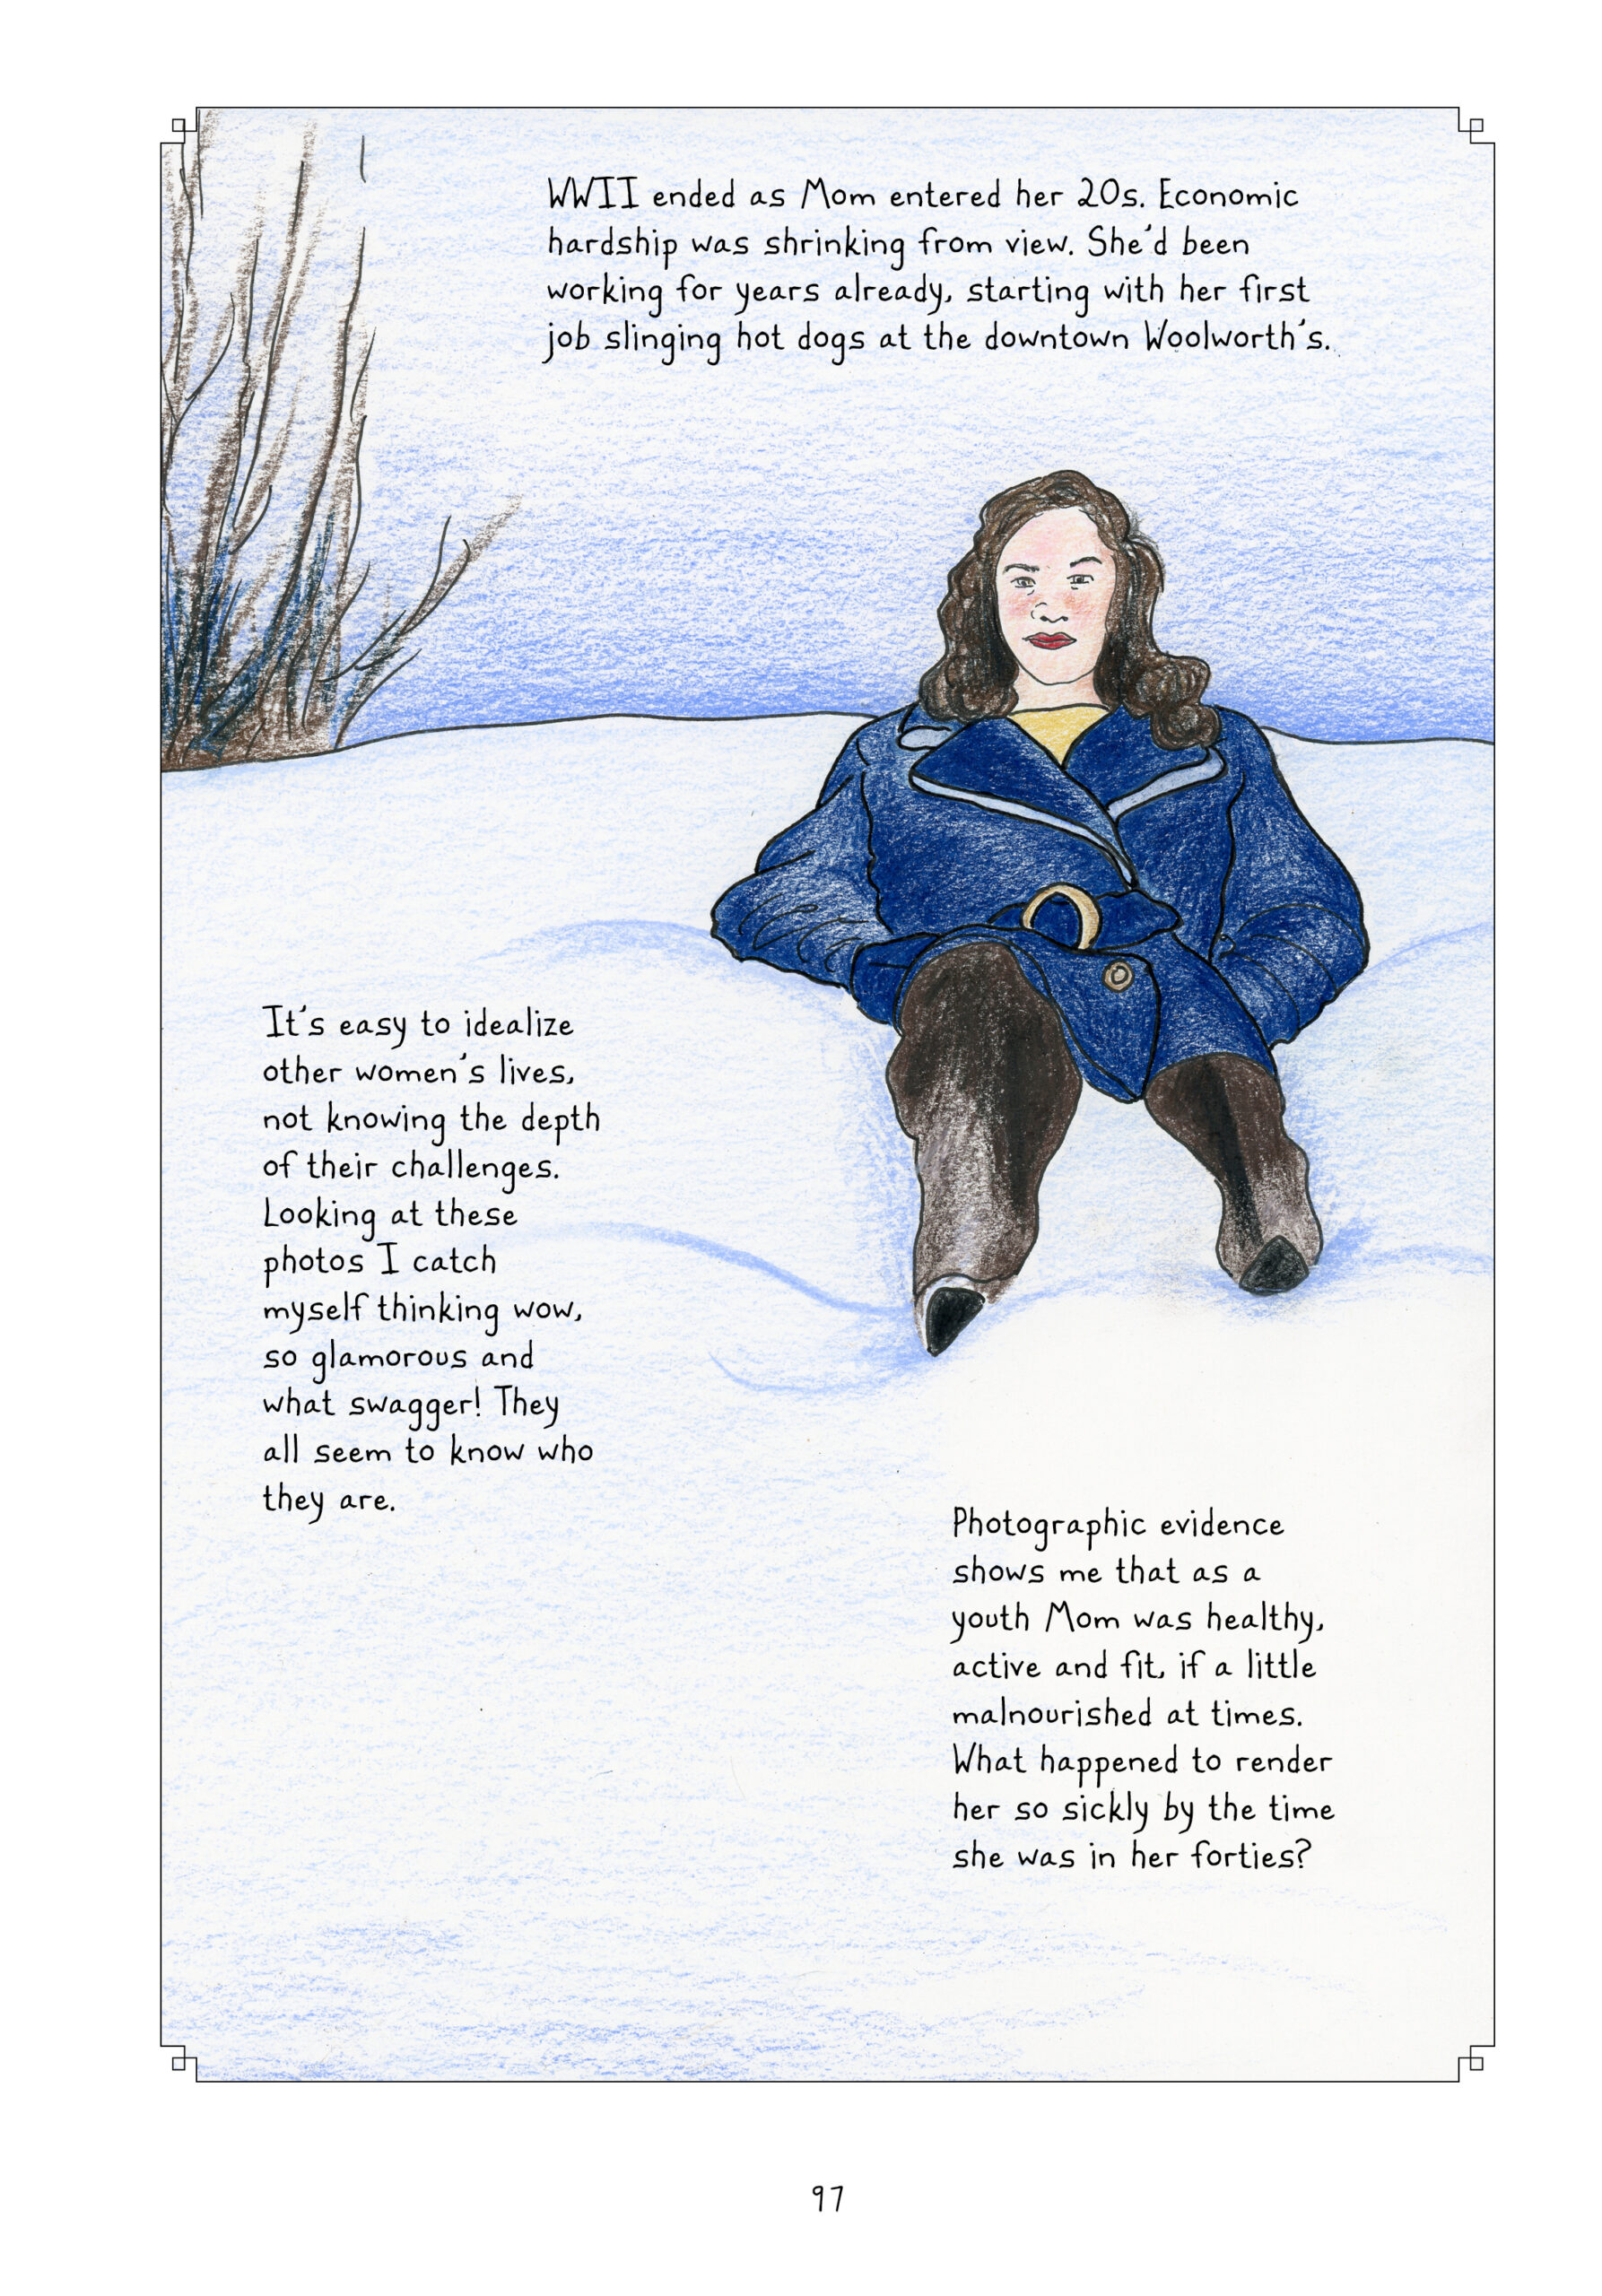 One panel fills the page. In full color, mostly tones of wintry blue, a twenty-something Lorraine sits in a pile of snow. She has longer wavy hair which falls past of her shoulders. She is wearing a fashionable blue coat over a yellow shirt, along with dark pants and black boots mostly buried in the snow. She looks seriously at the photographer/reader, one eyebrow slightly cocked. She is wearing a deep red lipstick and her cheeks are slightly flushed. The sky is blue and there is a leafless tree in the background towards the left. 
Lynn narrates, â€œWWII ended as Mom entered her 20s. Economic hardship was shrinking from view. Sheâ€™d been working for years already, starting with her first job slinging hot dogs at the downtown Woolworthâ€™s. Itâ€™s easy to idealize other womenâ€™s lives, not knowing the depth of their challenges. Looking at these photos I catch myself thinking wow, so glamorous and what swagger! They all seem to know who they are. Photographic evidence shows me that as a youth Mom was healthy, active and fit, if a little malnourished at times. What happened to render her so sickly by the time she was in her forties?â€